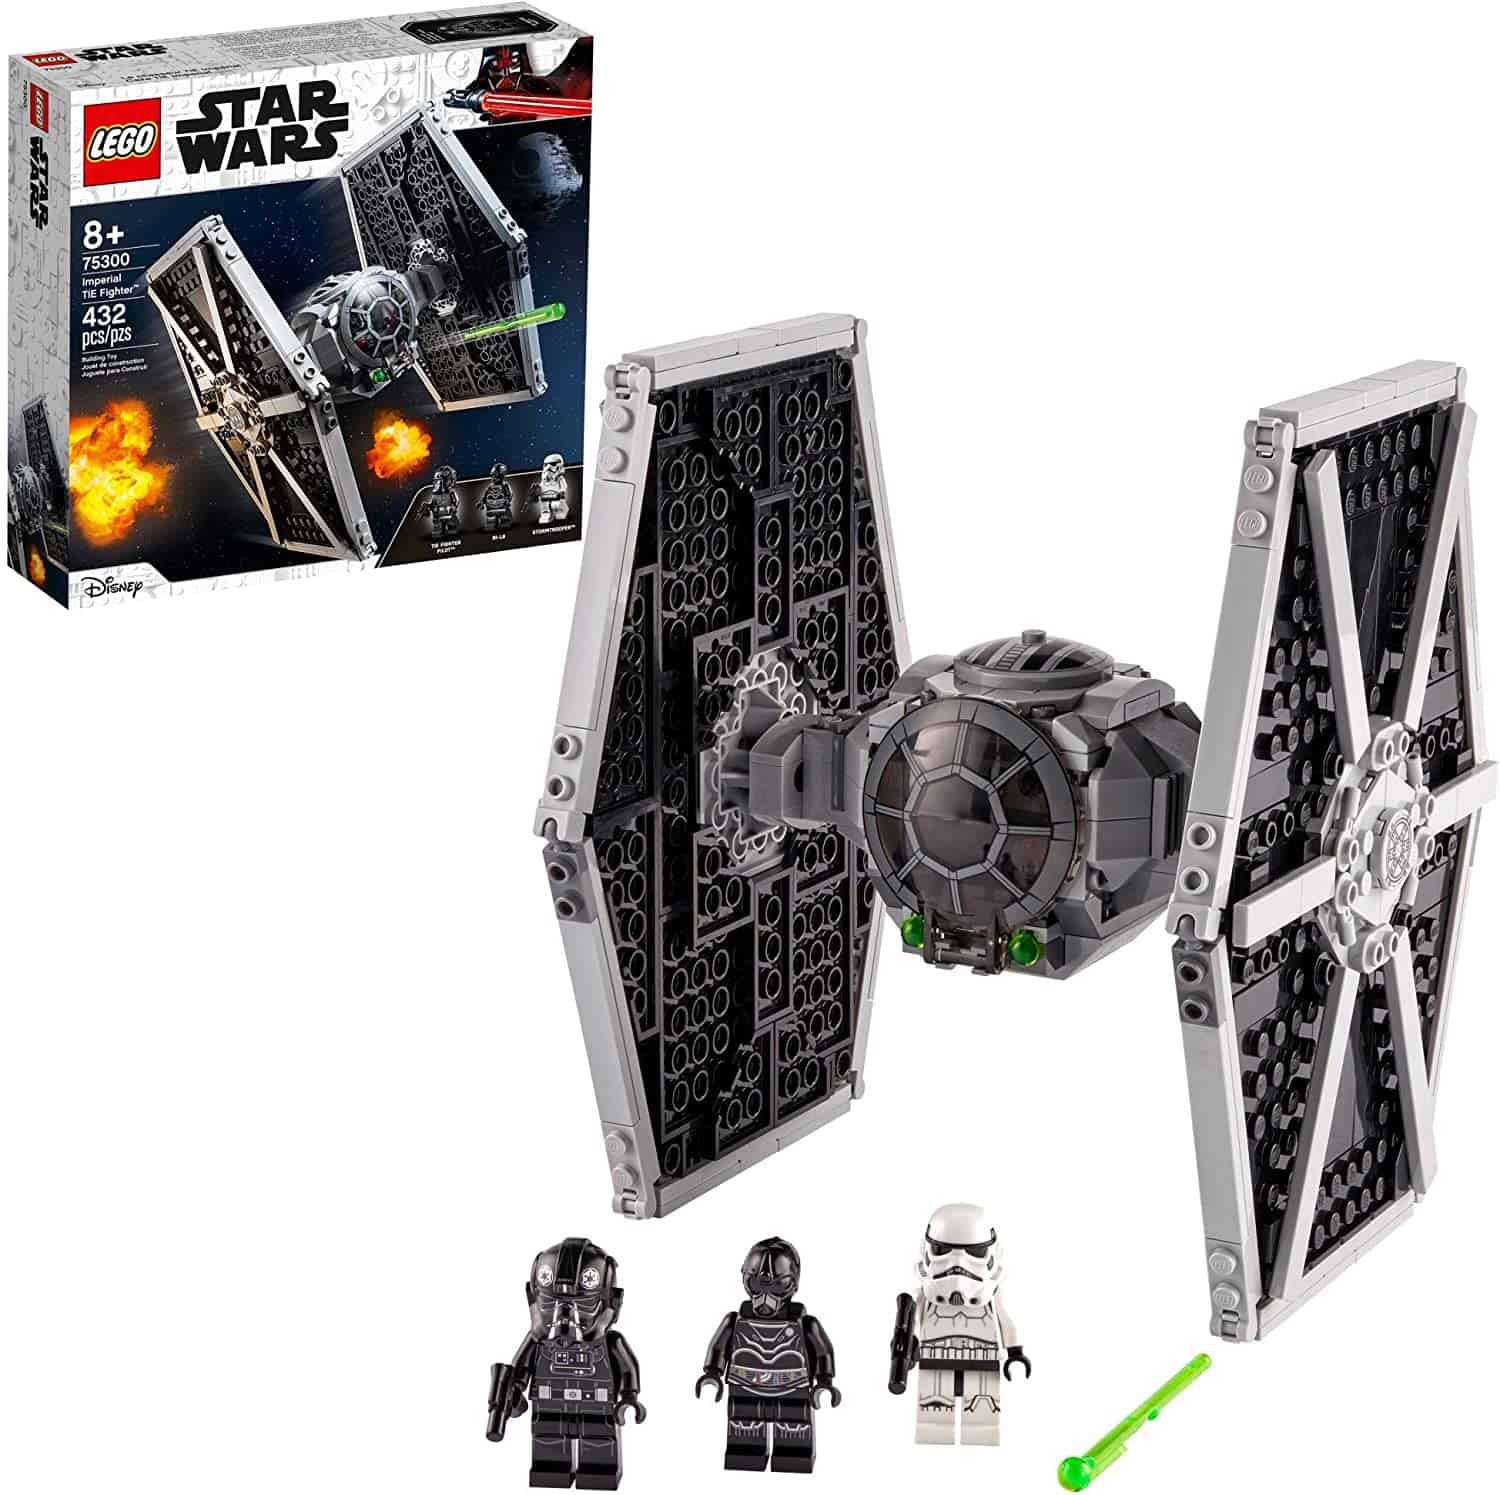 Amazon: LEGO Star Wars Imperial TIE Fighter ONLY $31.99 (Reg $40)